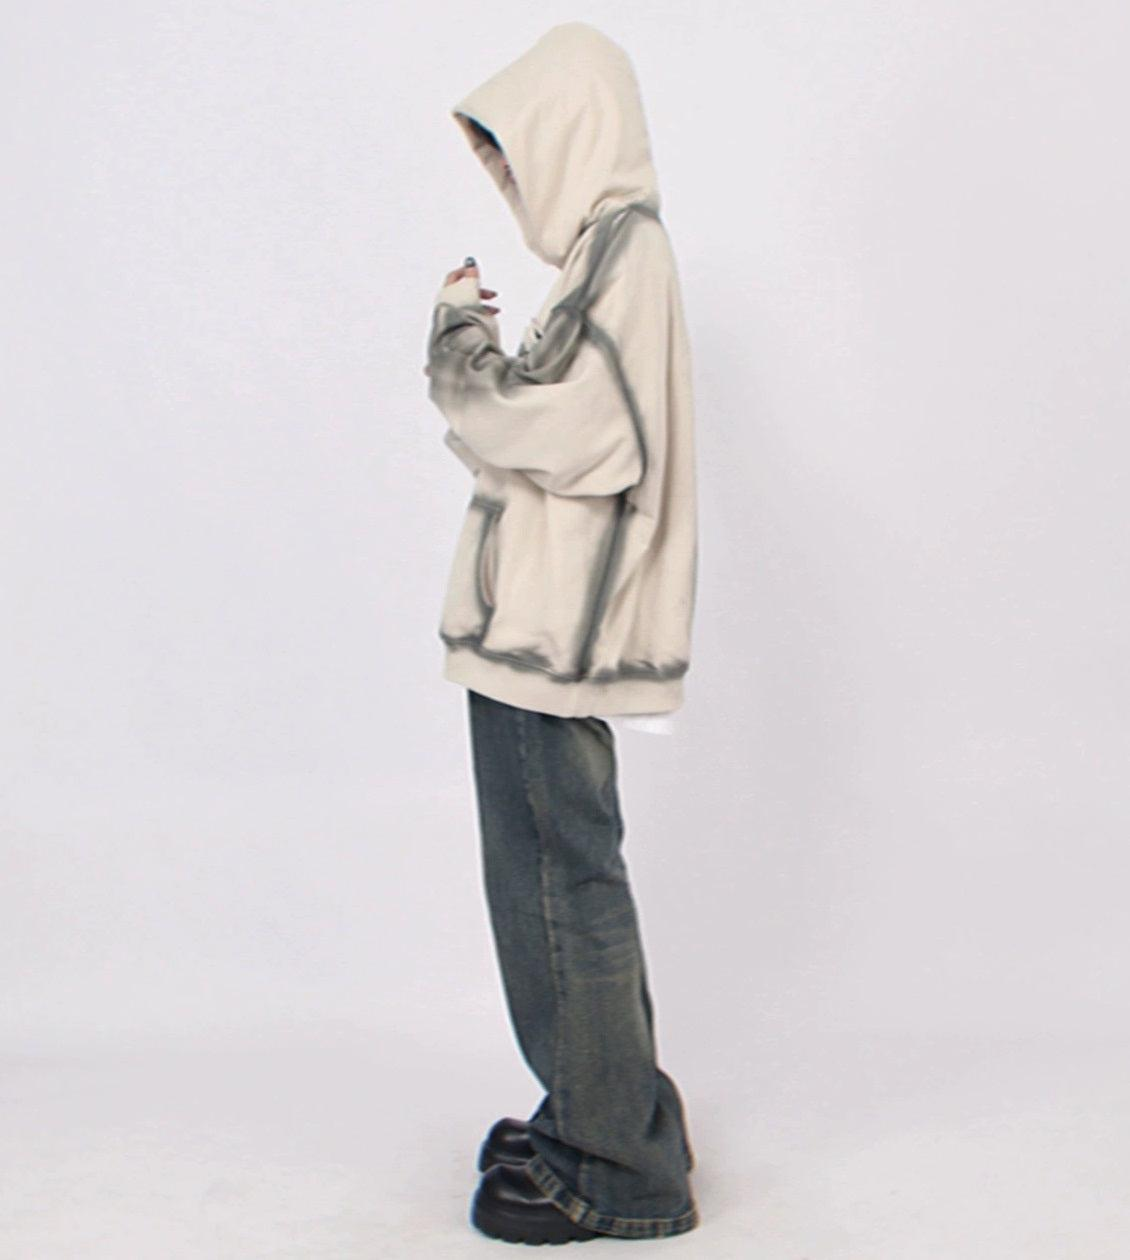 Oversize Patch Hoodie WN2925